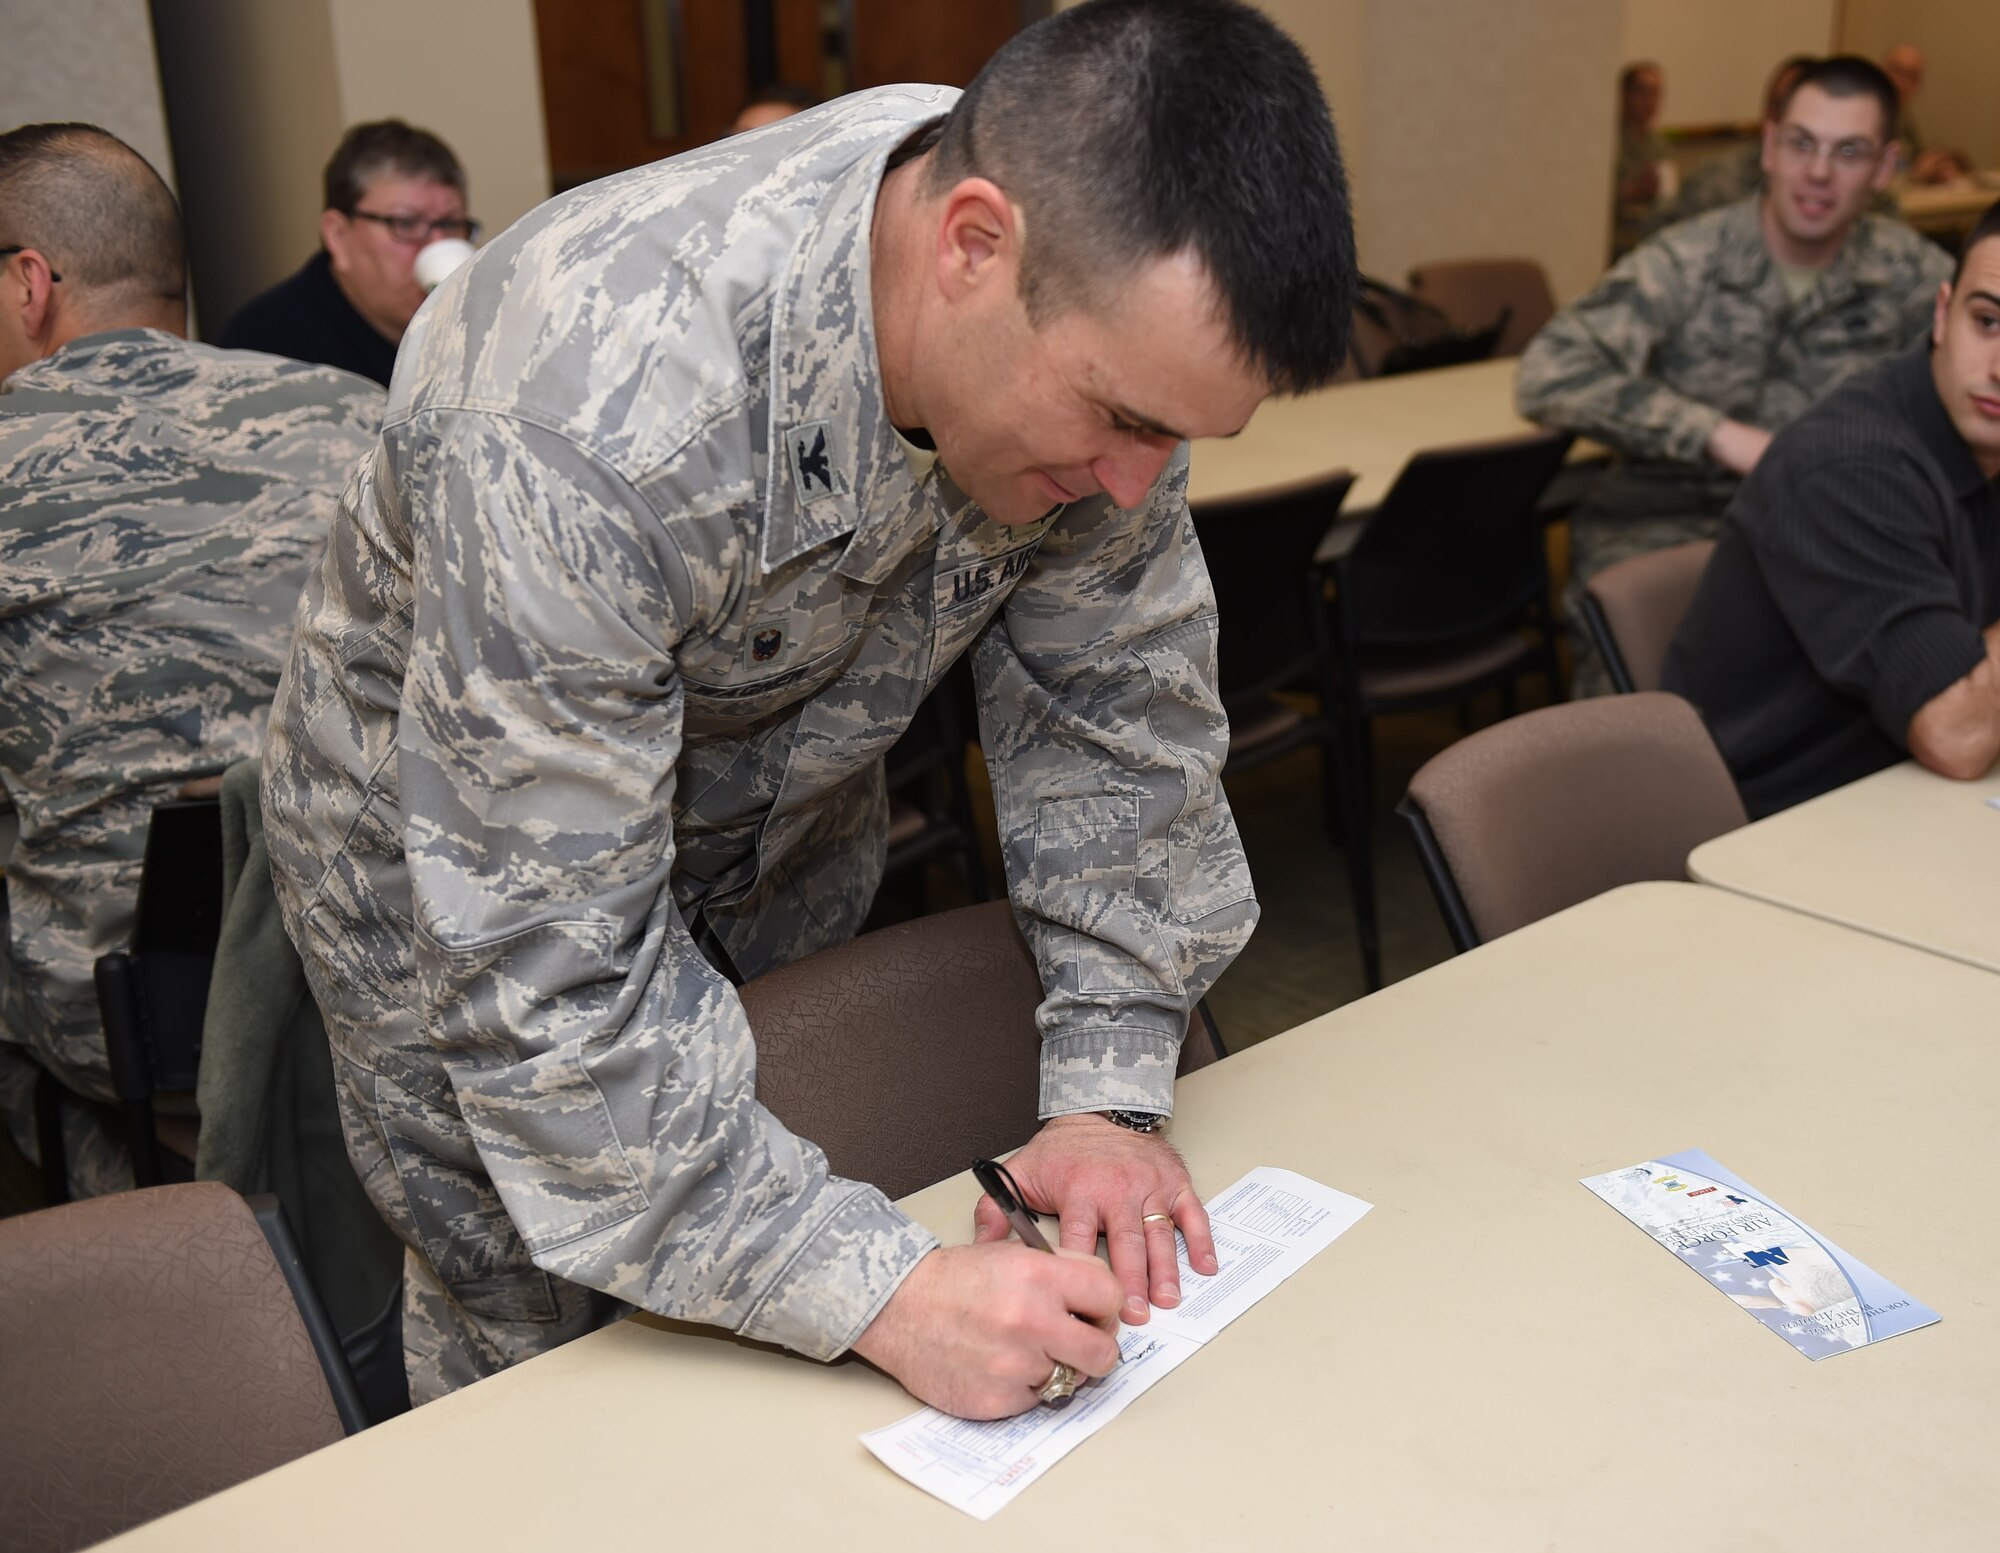 Col. John Wagner, 460th Space Wing commander, fills out a pledge card to donate to the Air Force Assistance Fund March 3, 2015, at the chapel on Buckley Air Force Base, Colo. The AFAF is designed to support Airmen and their families who are going through hardships such as family emergencies or financial troubles. (U.S. Air Force photo by Airman 1st Class Samantha Saulsbury/Released)